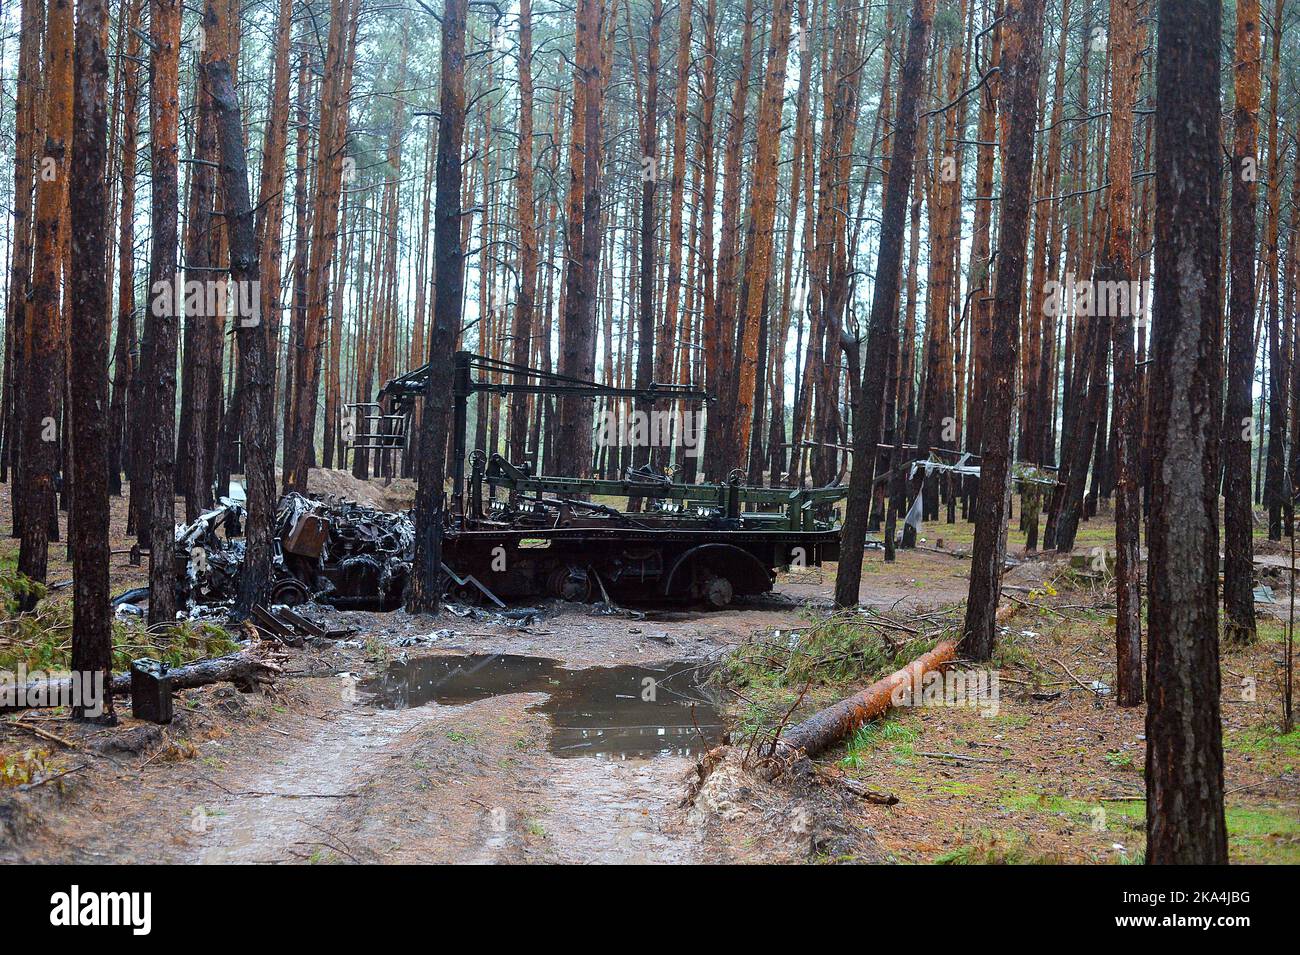 Non Exclusive: KHARKIV REGION, UKRAINE - OCTOBER 26, 2022 - A burnt-out Russian charger for a BM-21 Grad multiple rocket launcher is pictured in a for Stock Photo